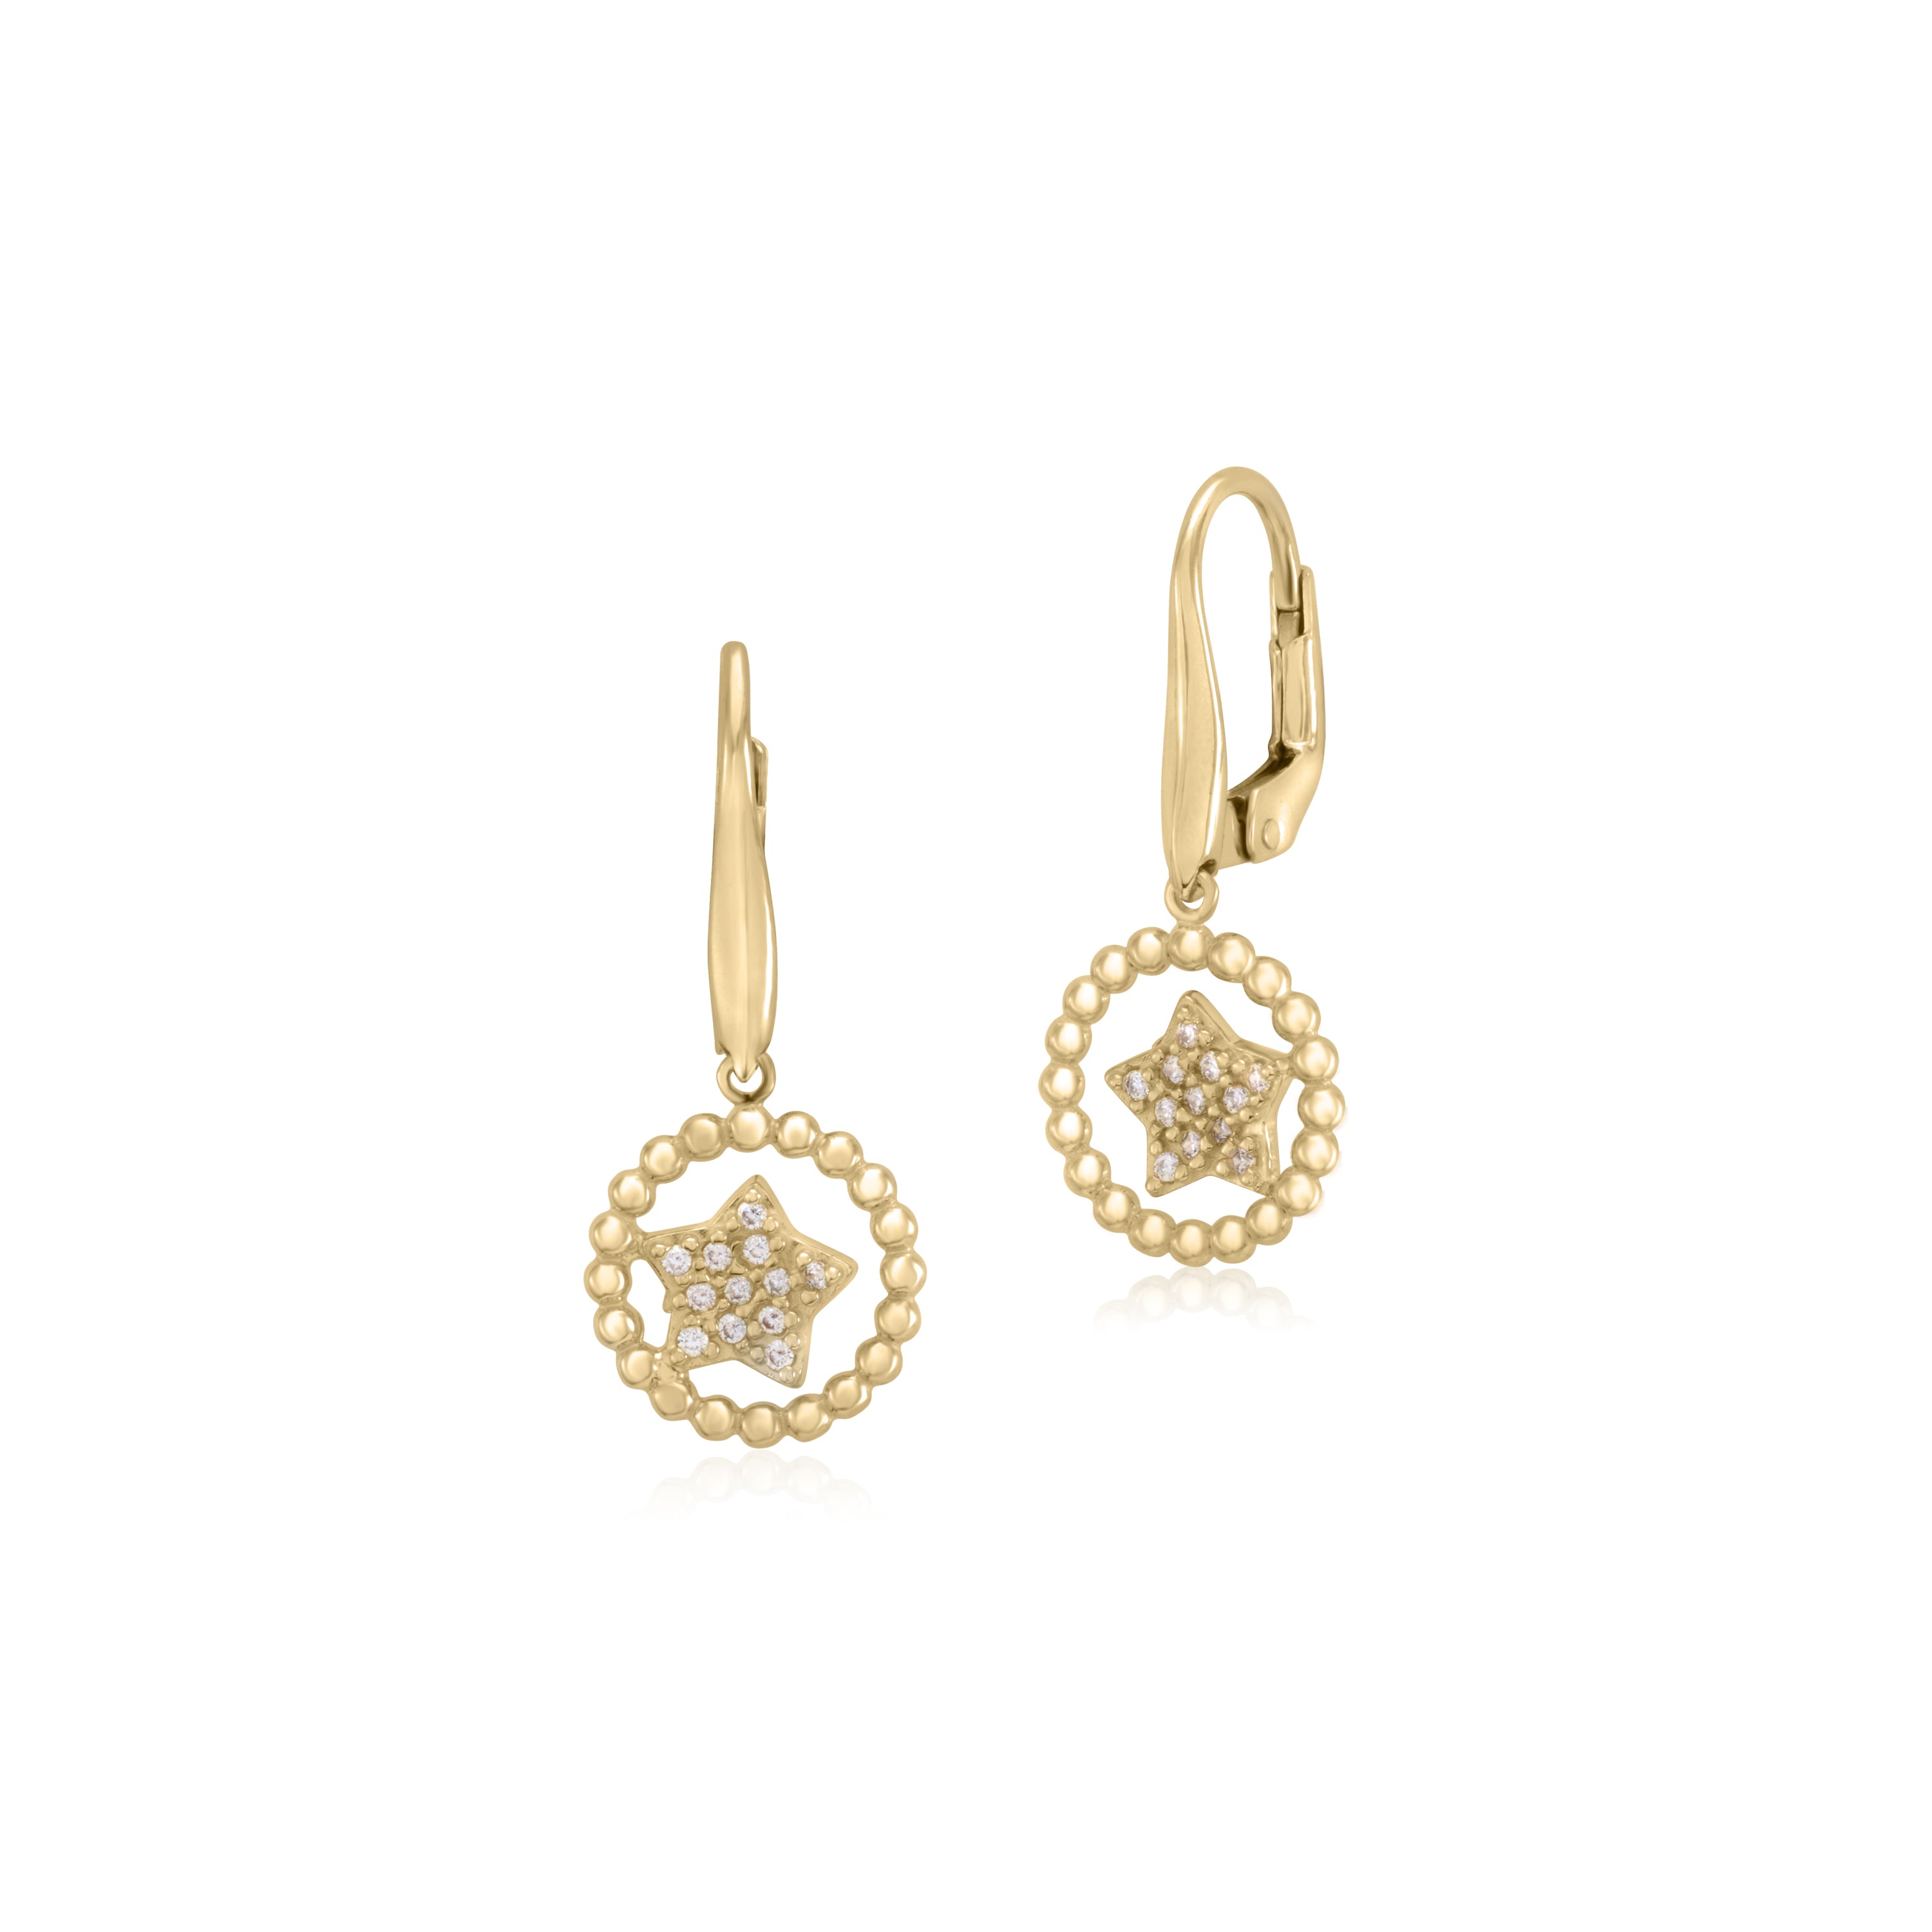 14K Yellow Gold Leverback Earrings Floating Star Pave CZ in Open Beaded Circle